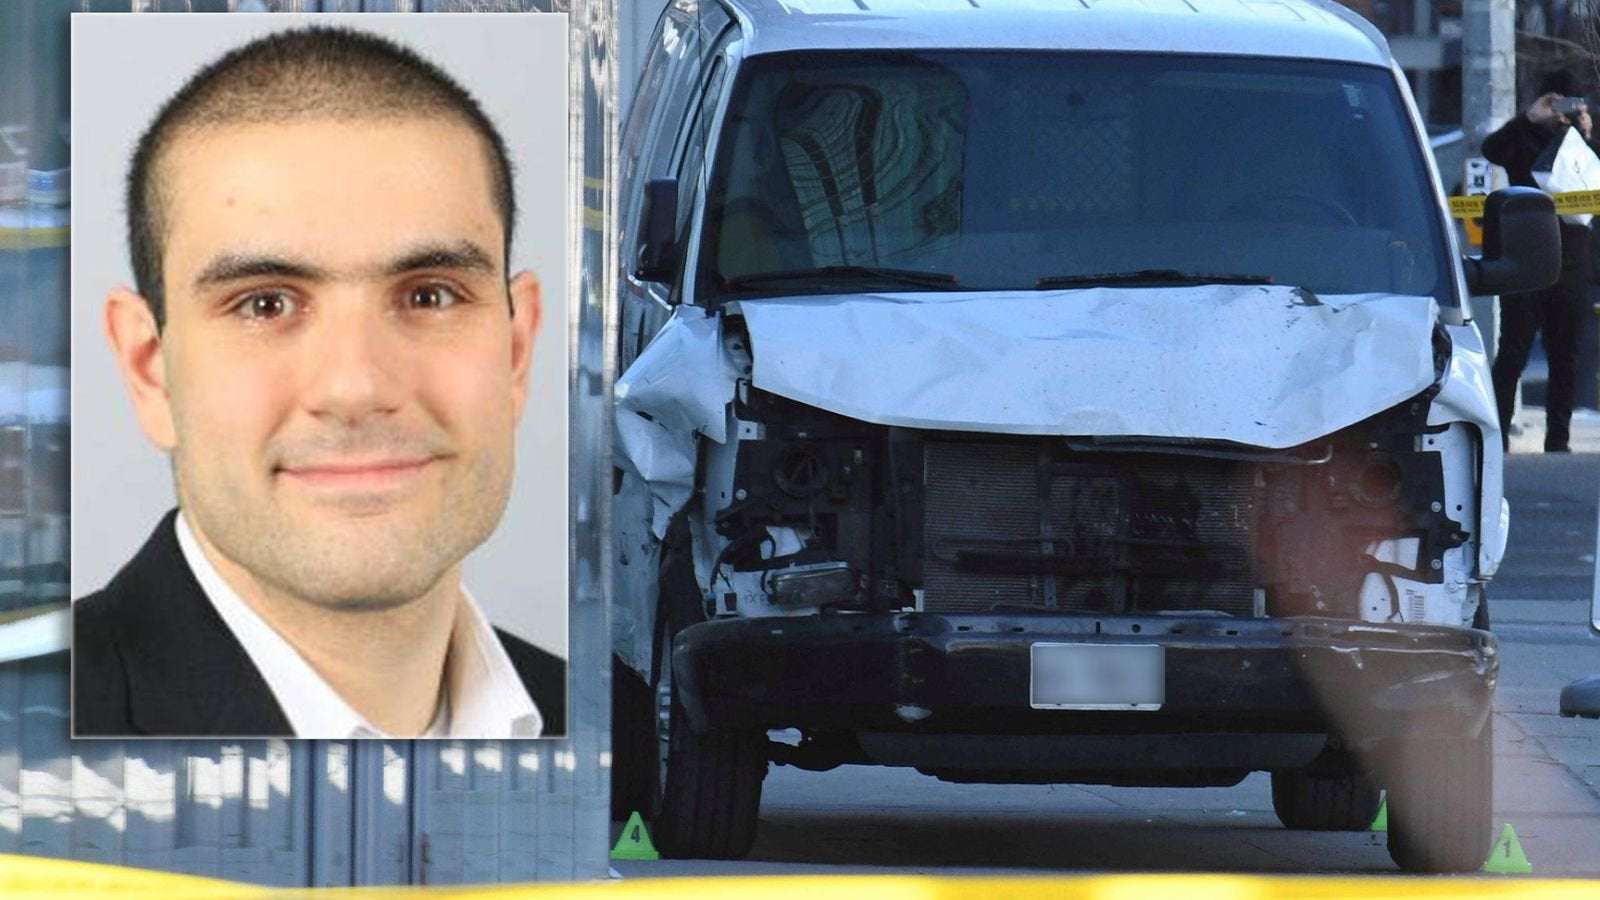 image for Toronto van attack: 'Incel' man admits attack that killed 10 people